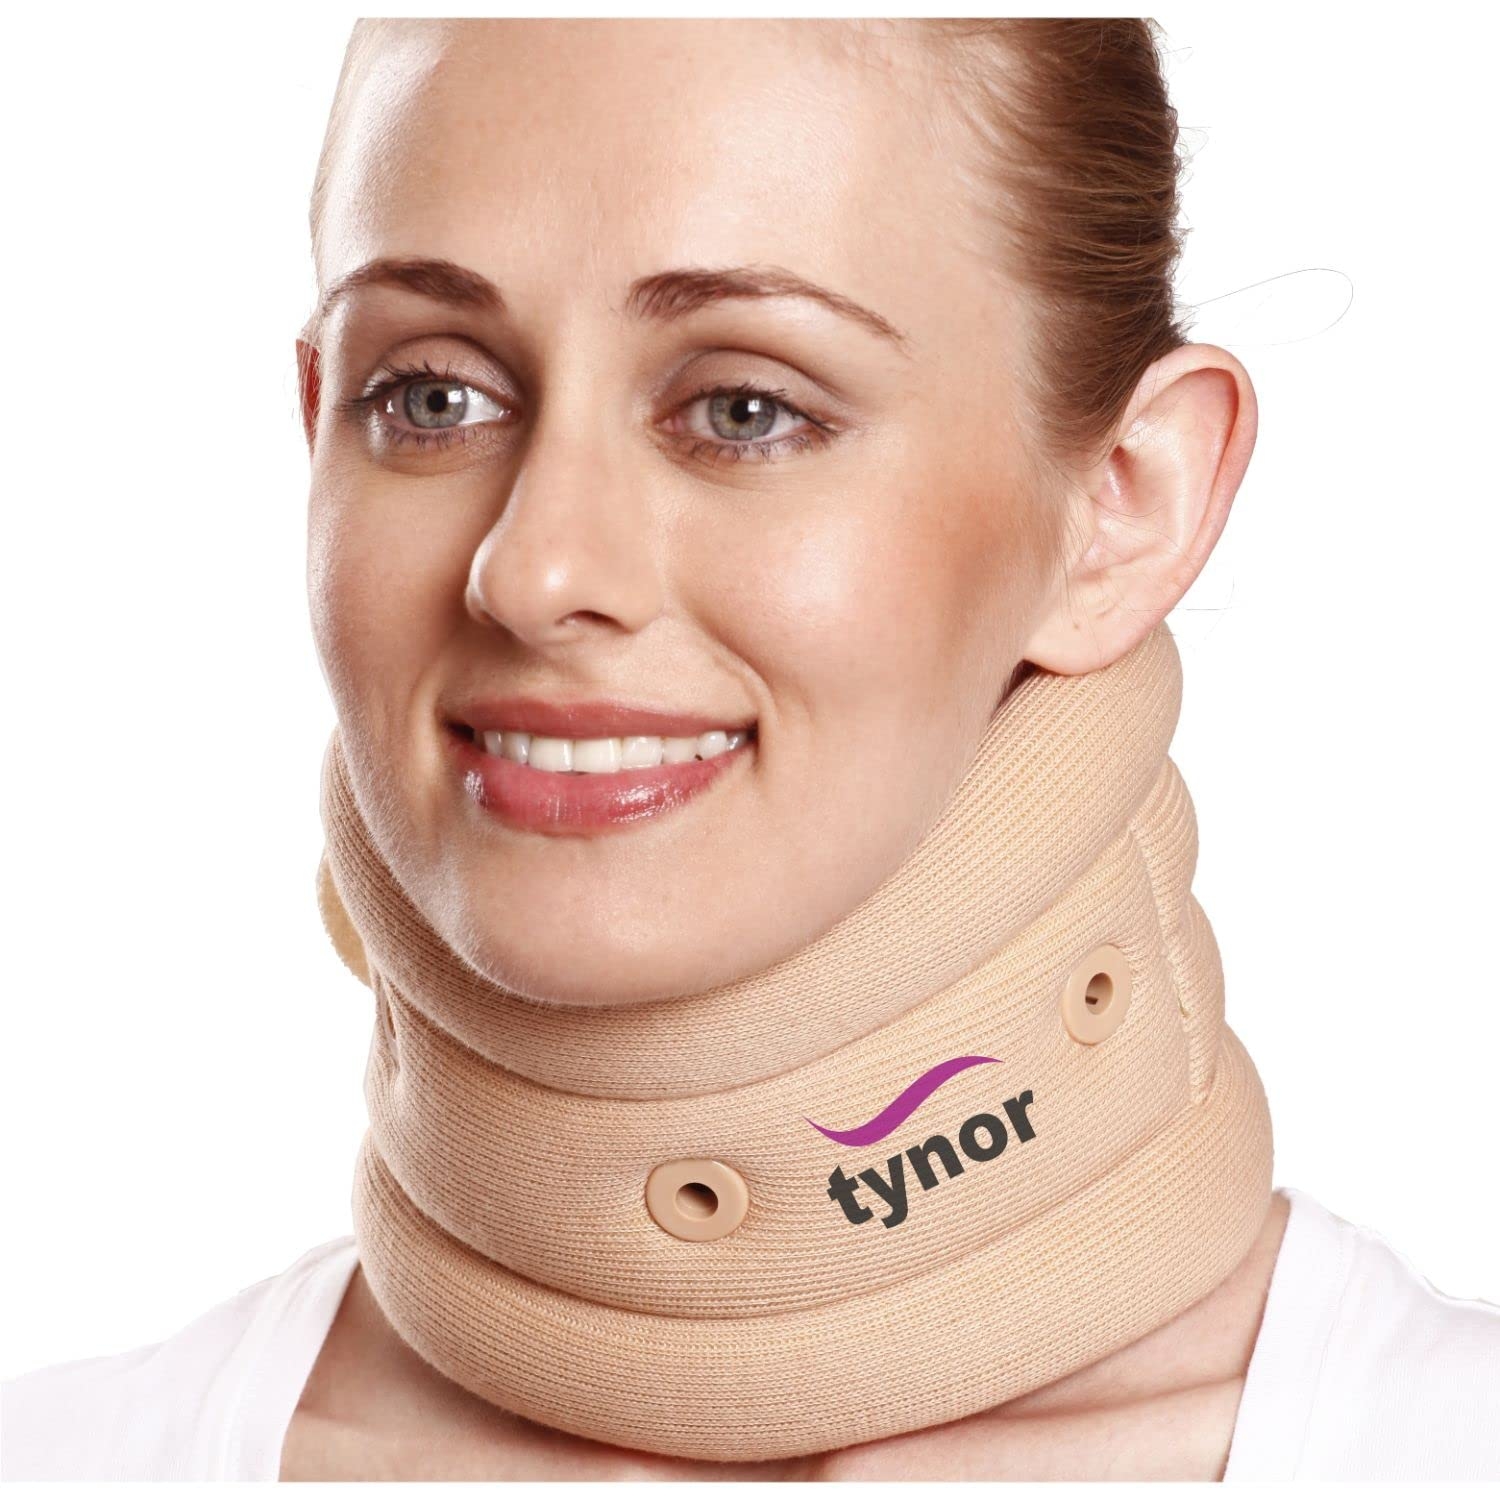 Cervical Collar Soft with cotton stockinet provides Support cushioning Beige, Medium, Thick round, 1 Unit